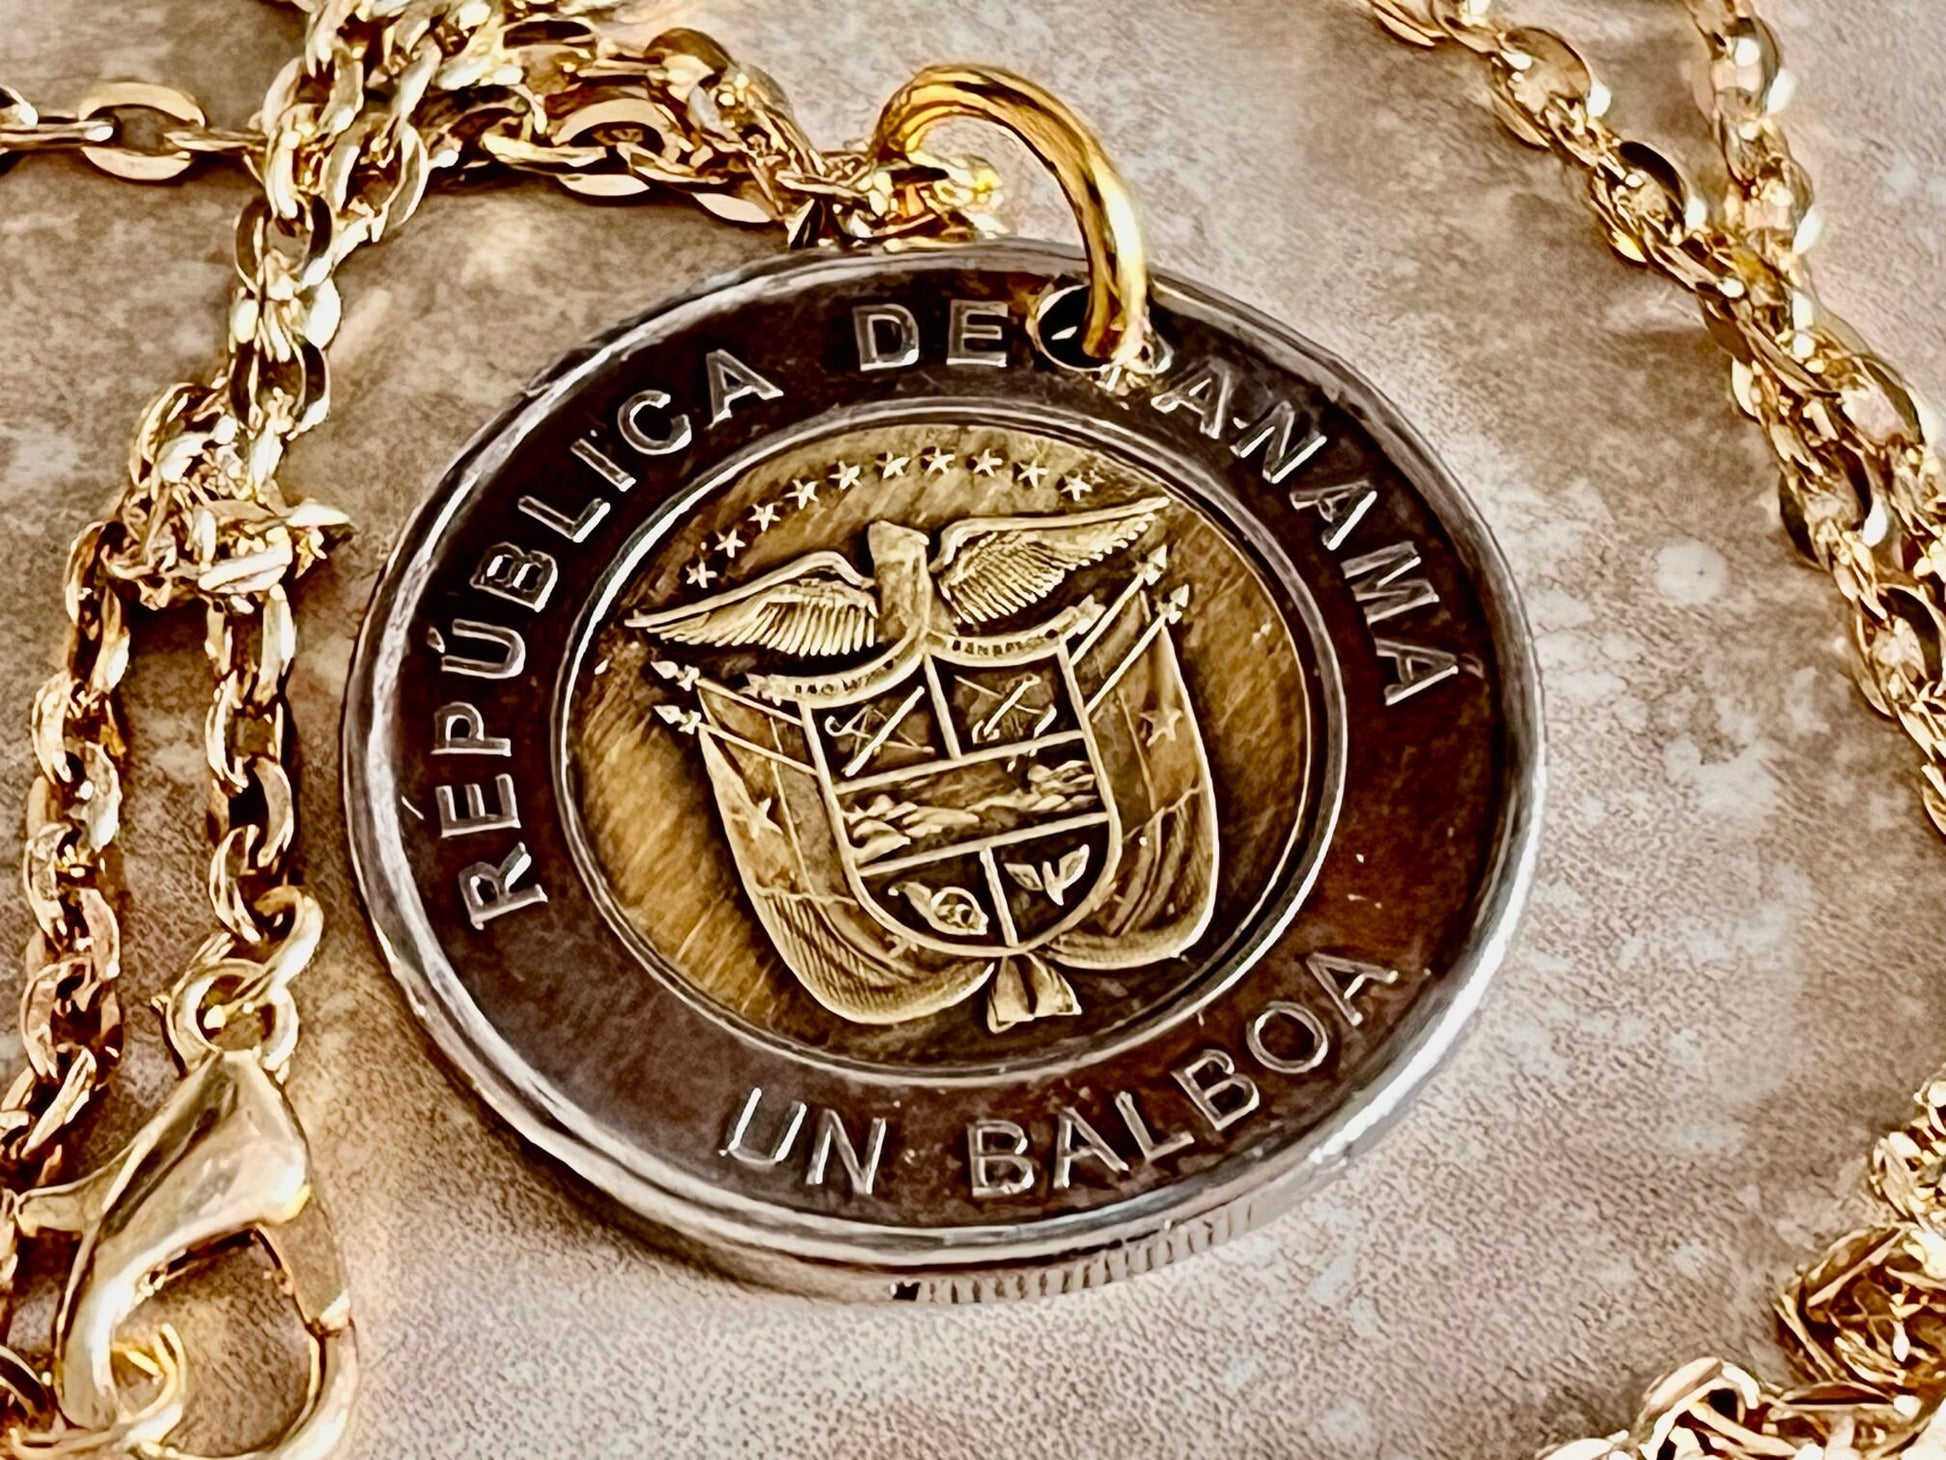 Panama Coin UN Balboa Personal Vintage Necklace Old Handmade Jewelry Gift Friend Charm For Him Her World Coin Collector